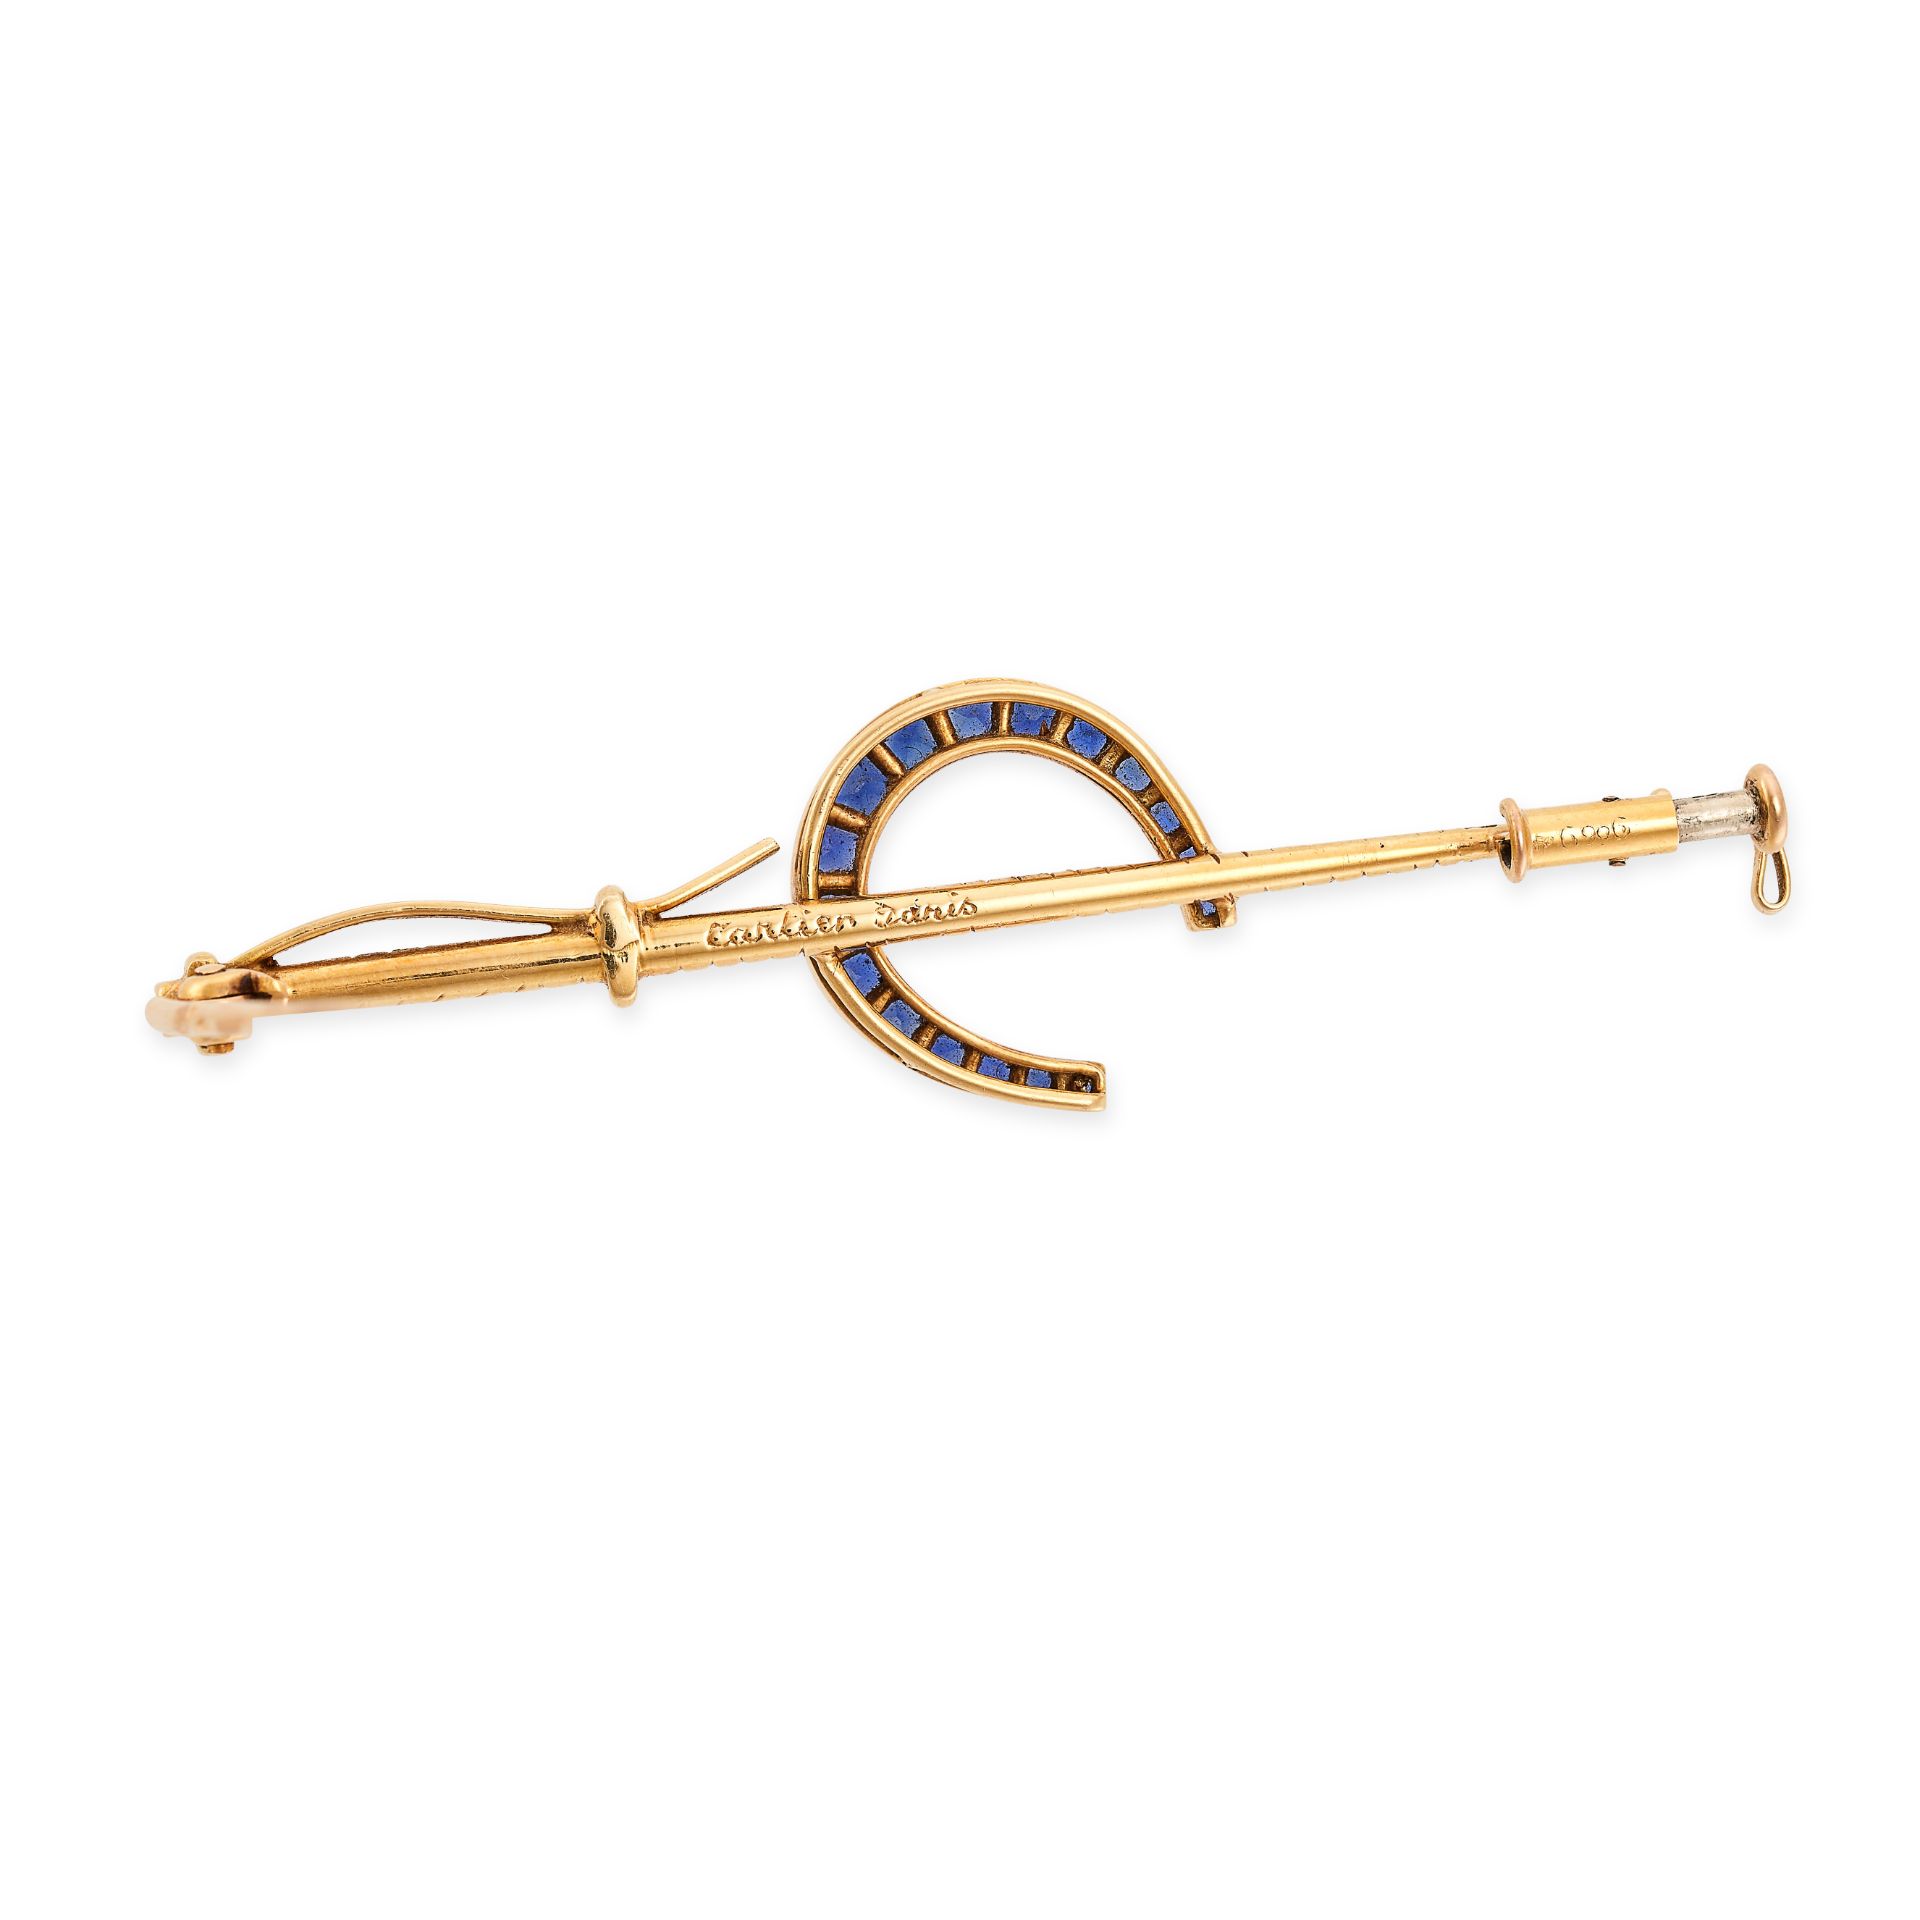 CARTIER, A SAPPHIRE STOCK PIN BROOCH in 18ct yellow gold, designed as a riding crop and horse shoe - Bild 2 aus 2